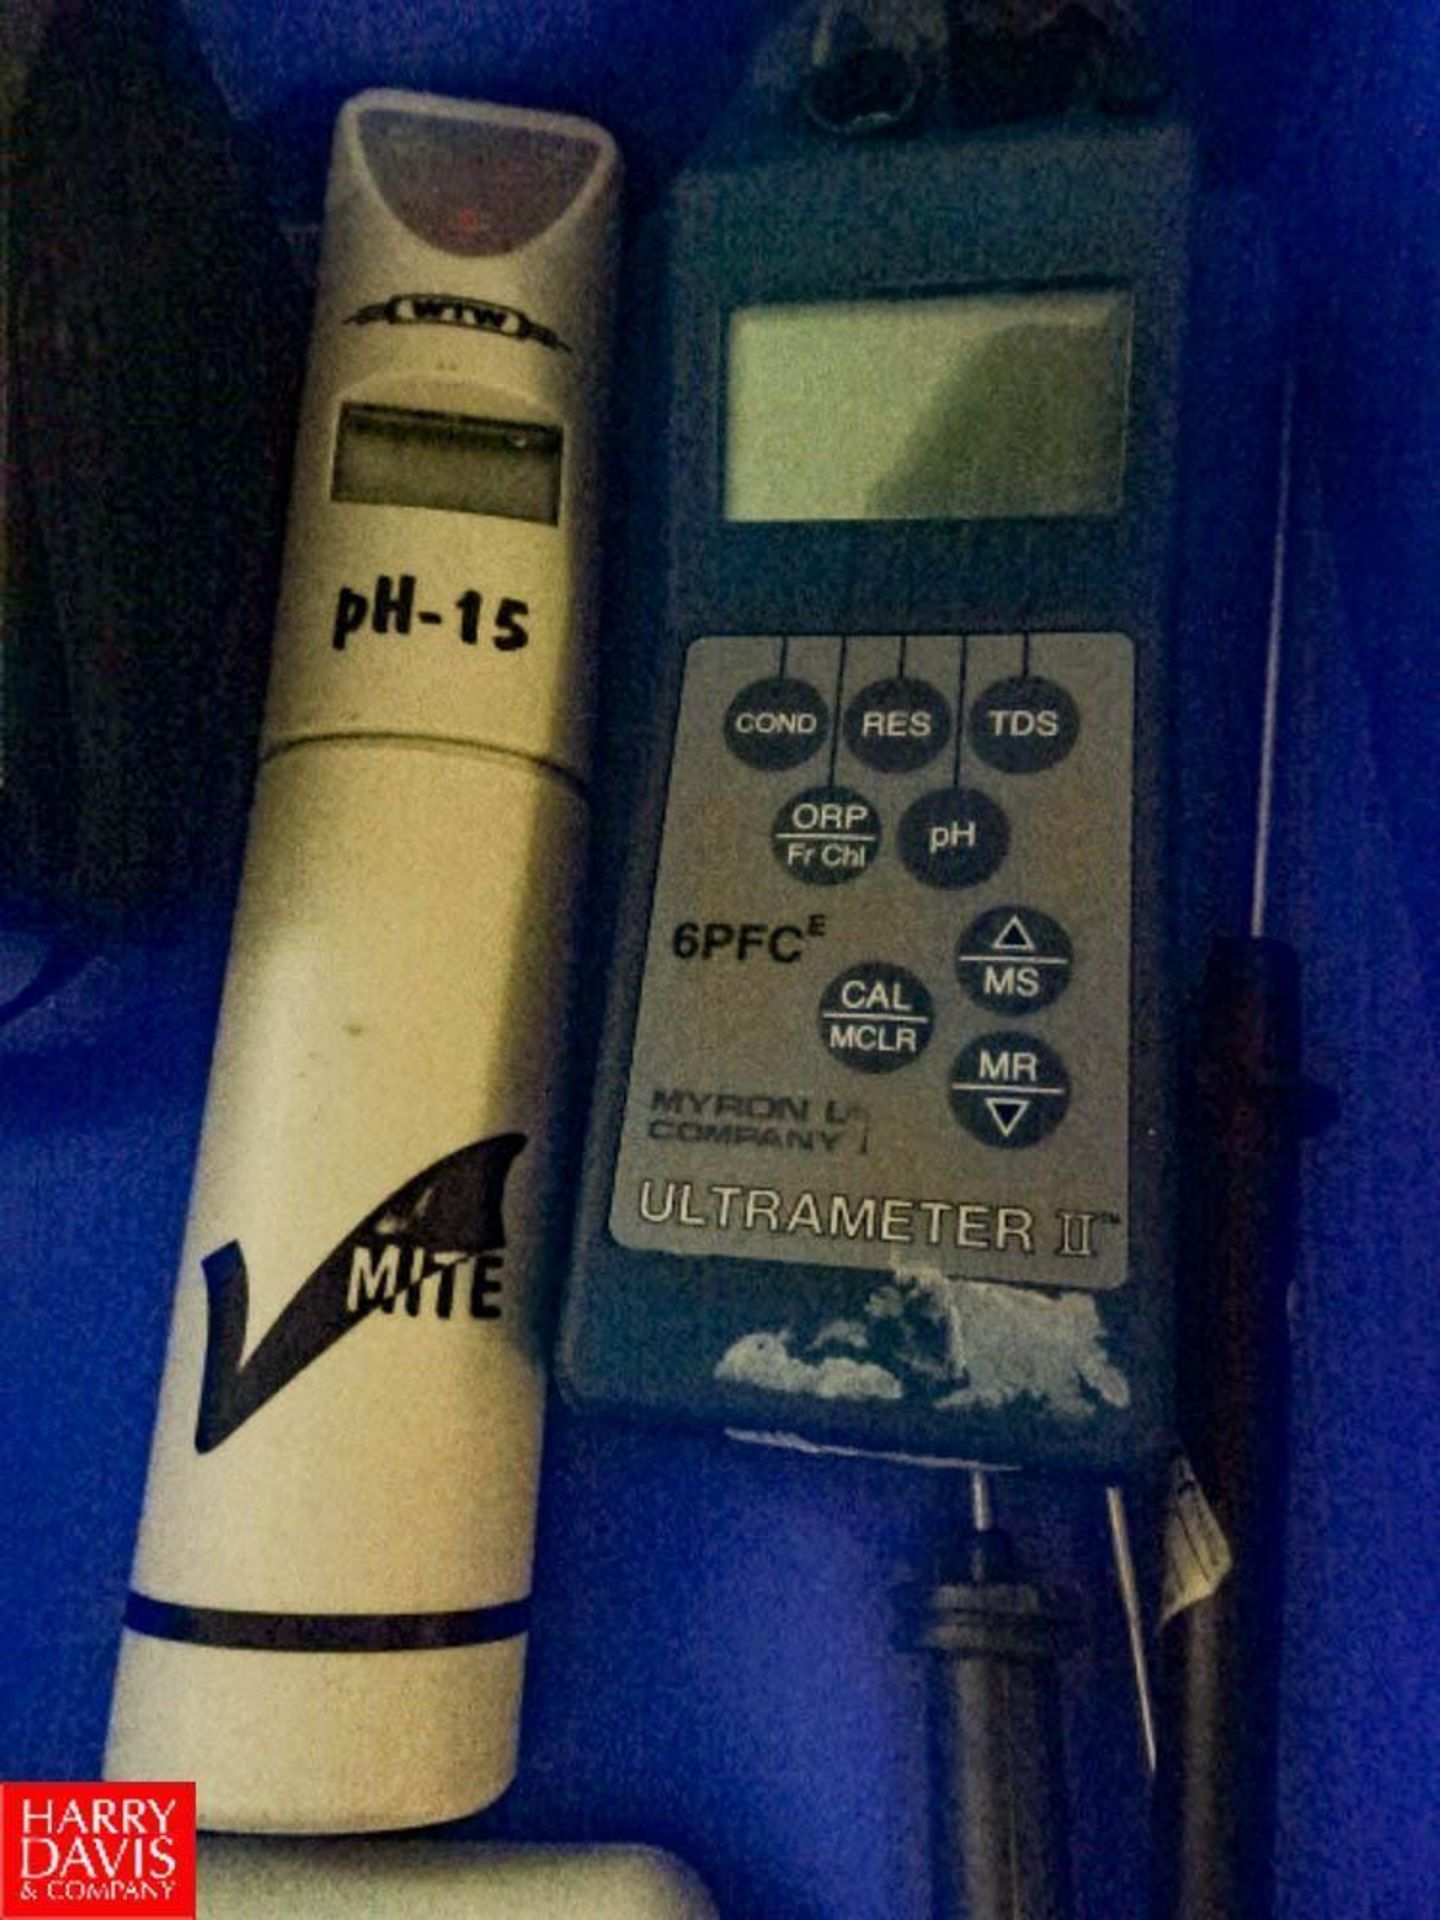 Assorted Handheld Meters Consisting of (1) Myron L Comp. DS Meter, (1) Cole and Palmer Thermocouple, - Image 4 of 4